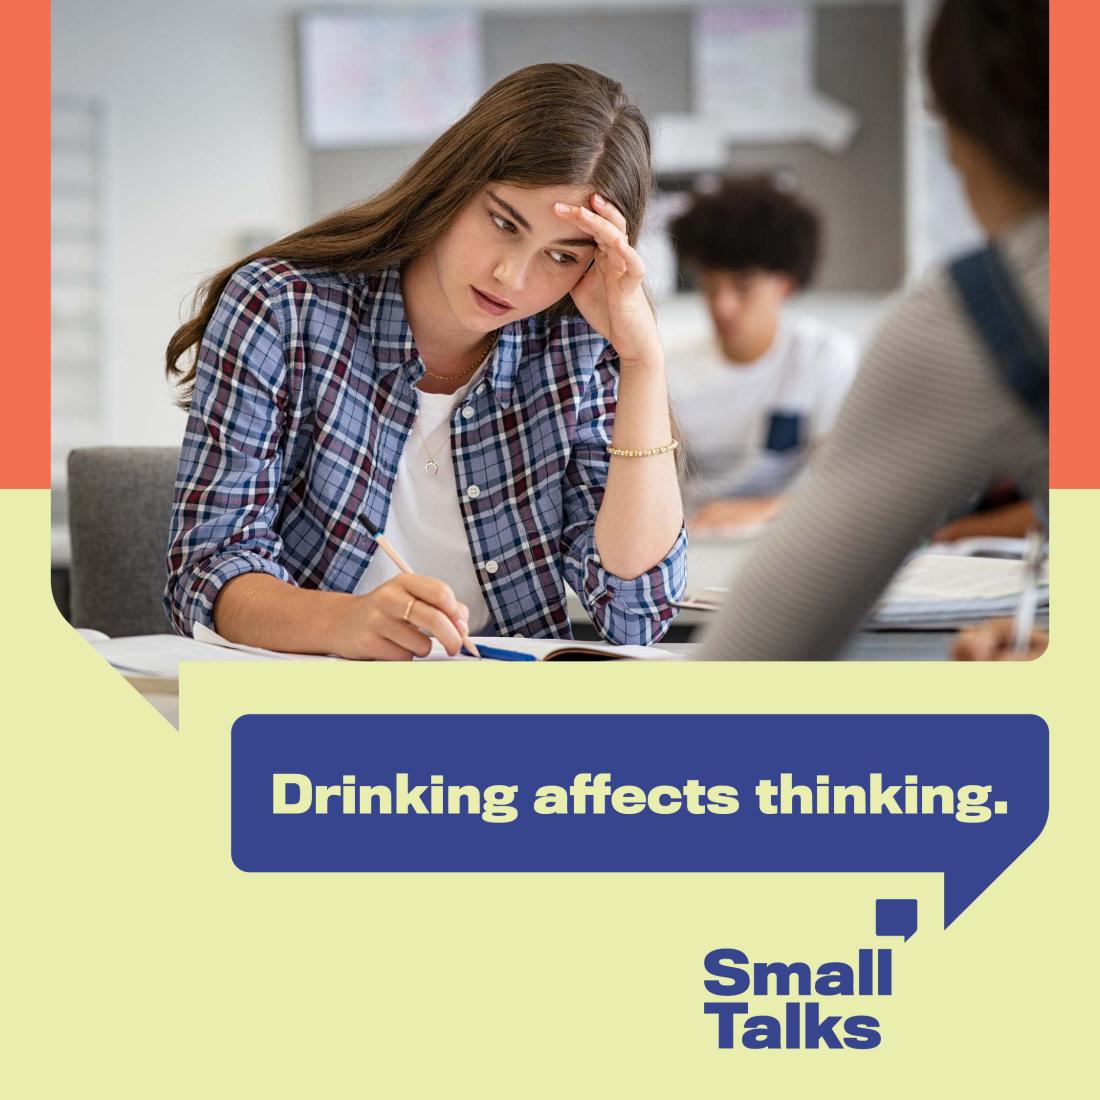 Drinking affects thinking